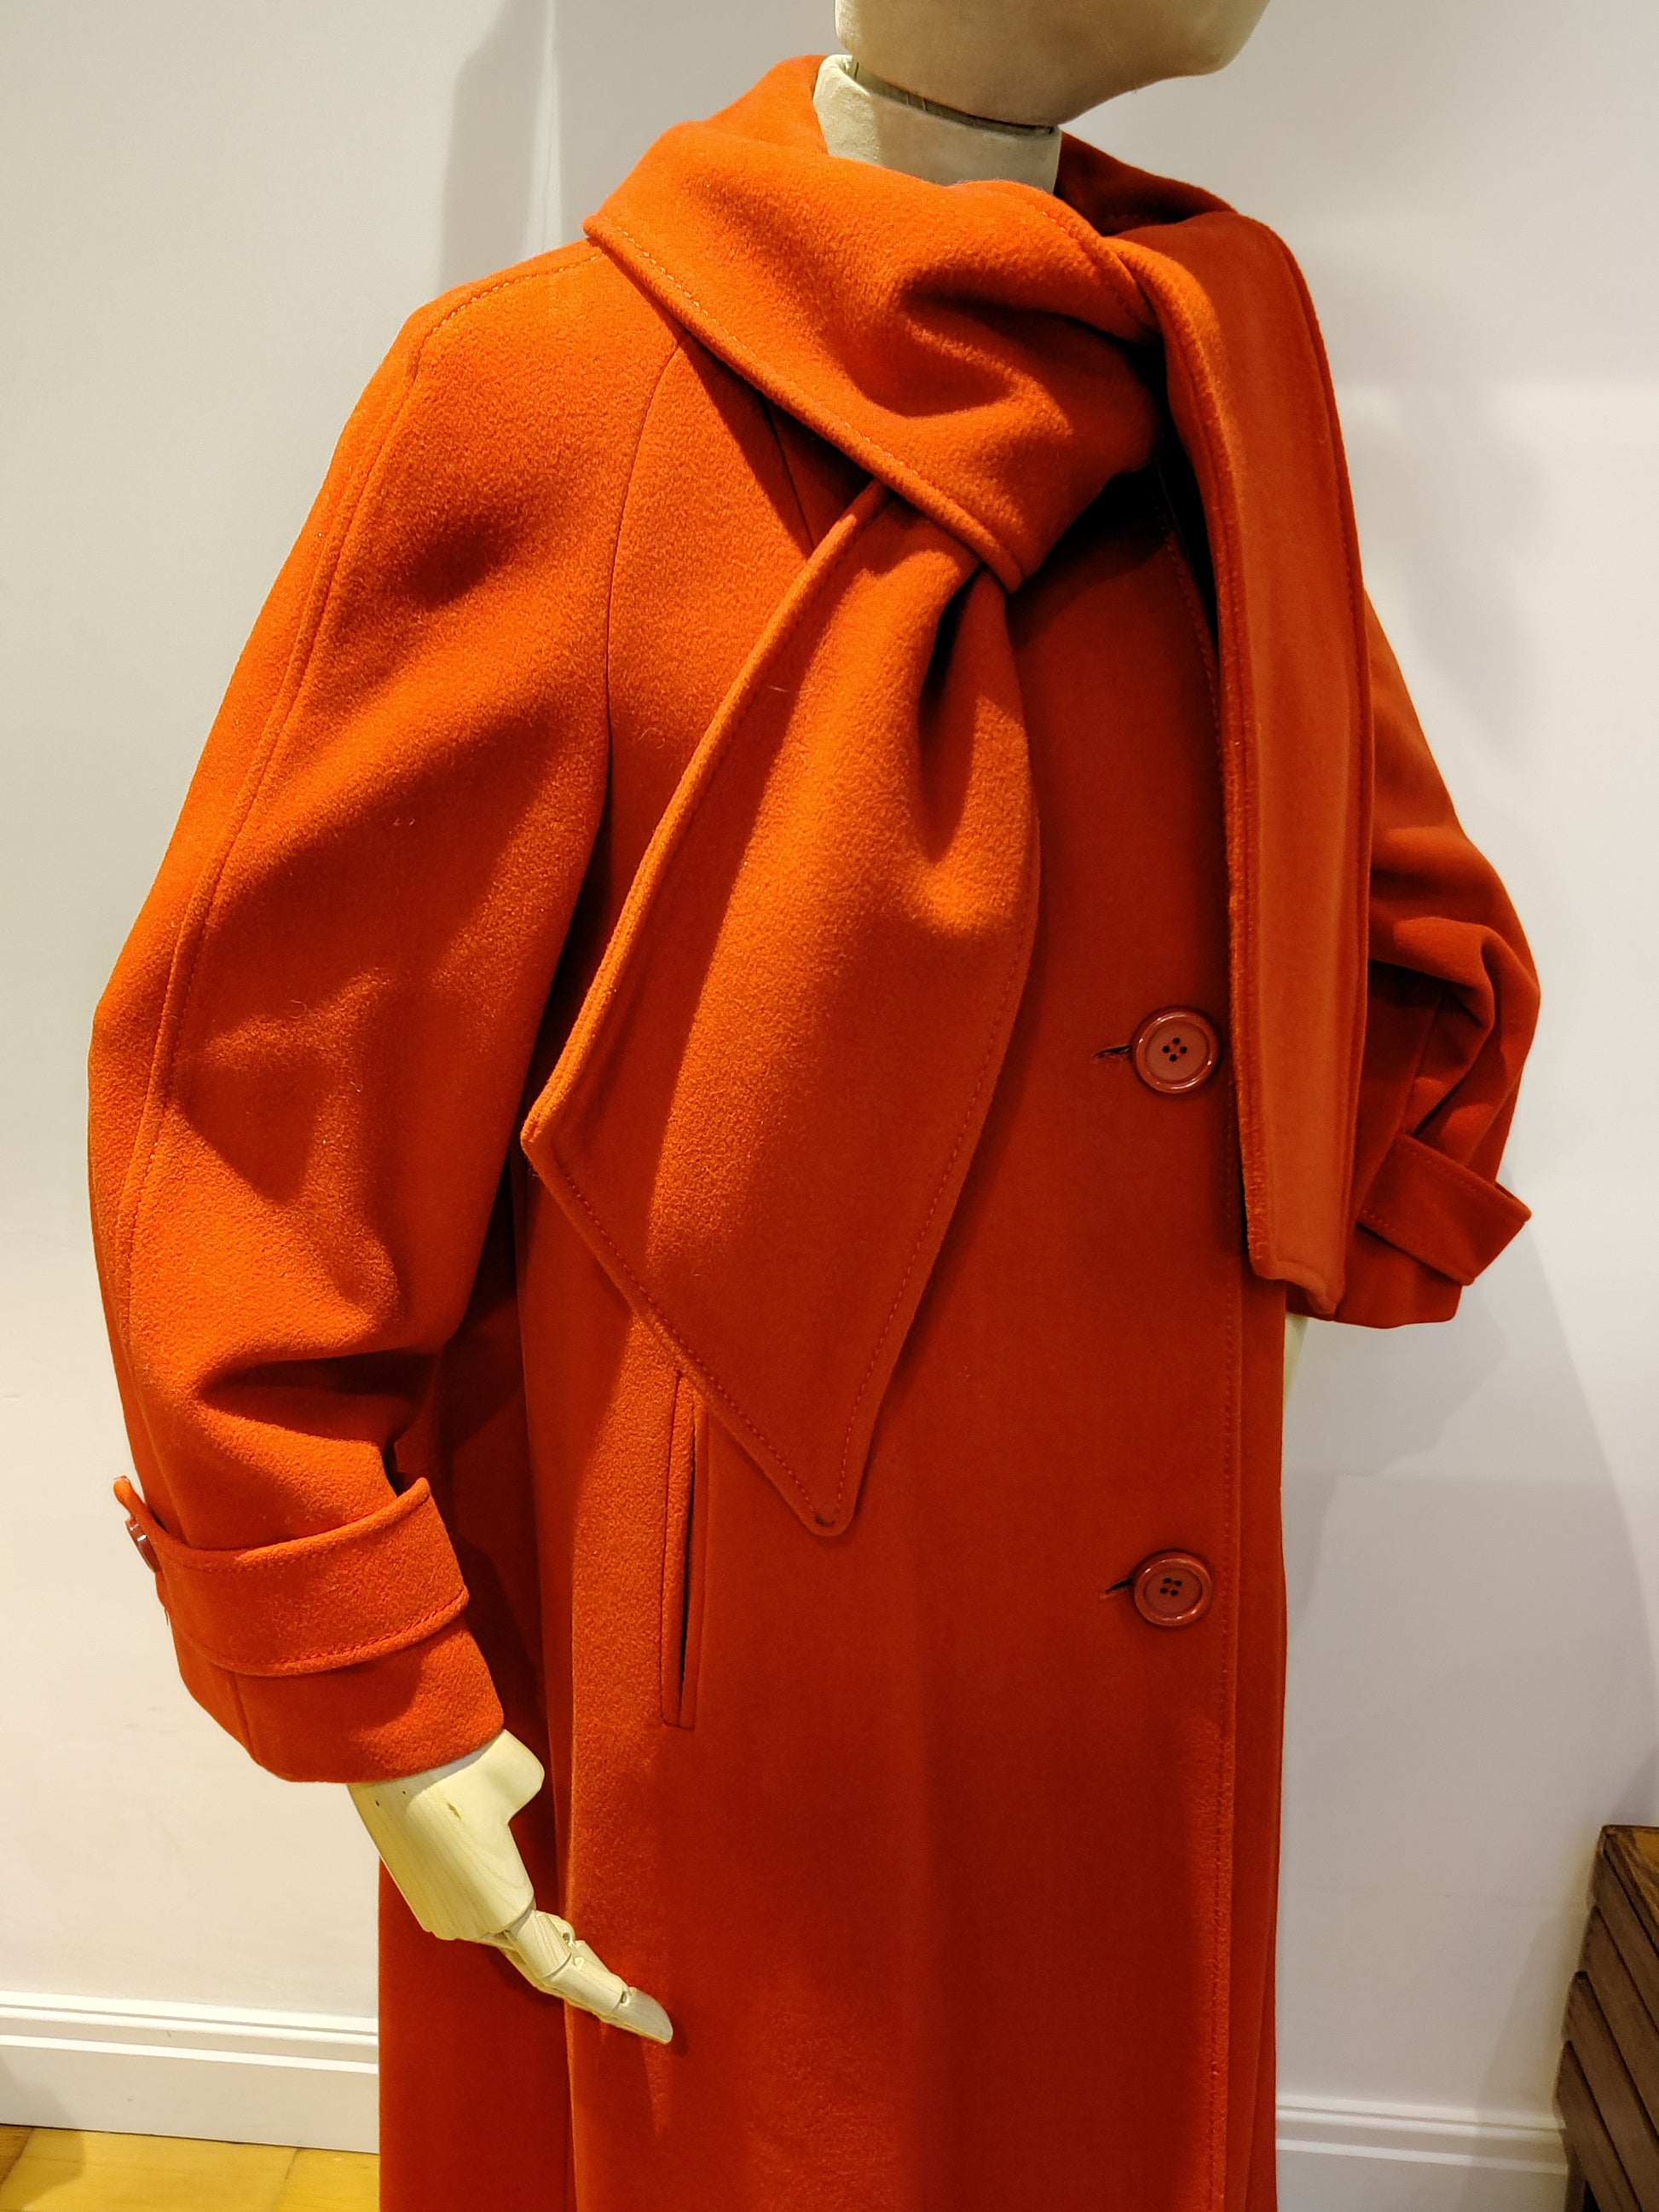 Lined and stylish red vintage coat